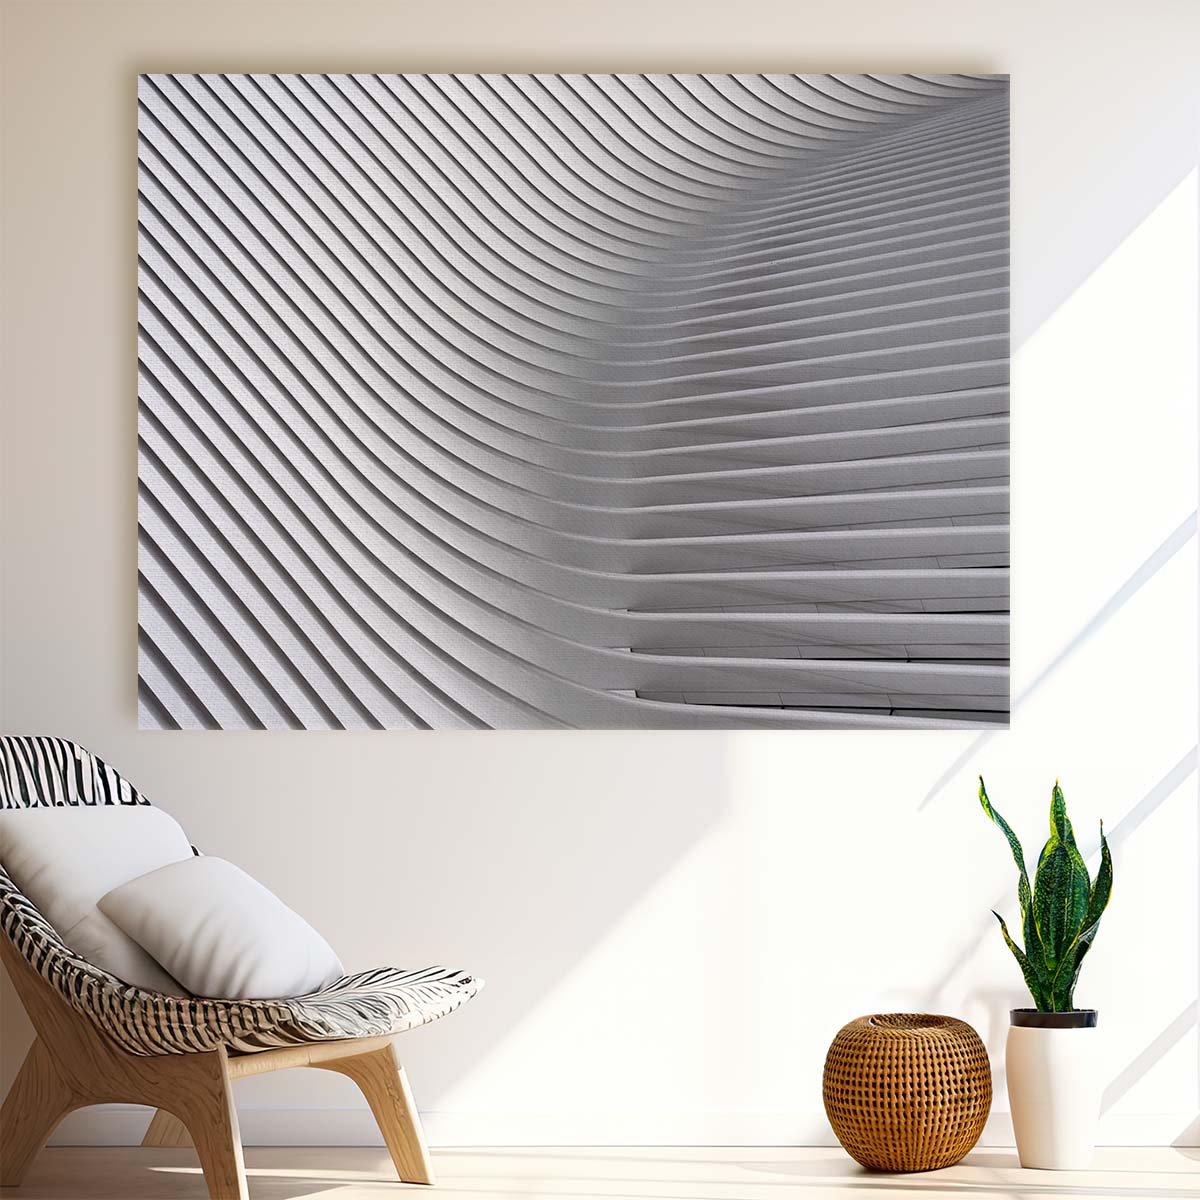 Santiago Calatrava Inspired Geometric Curves Wall Art by Luxuriance Designs. Made in USA.